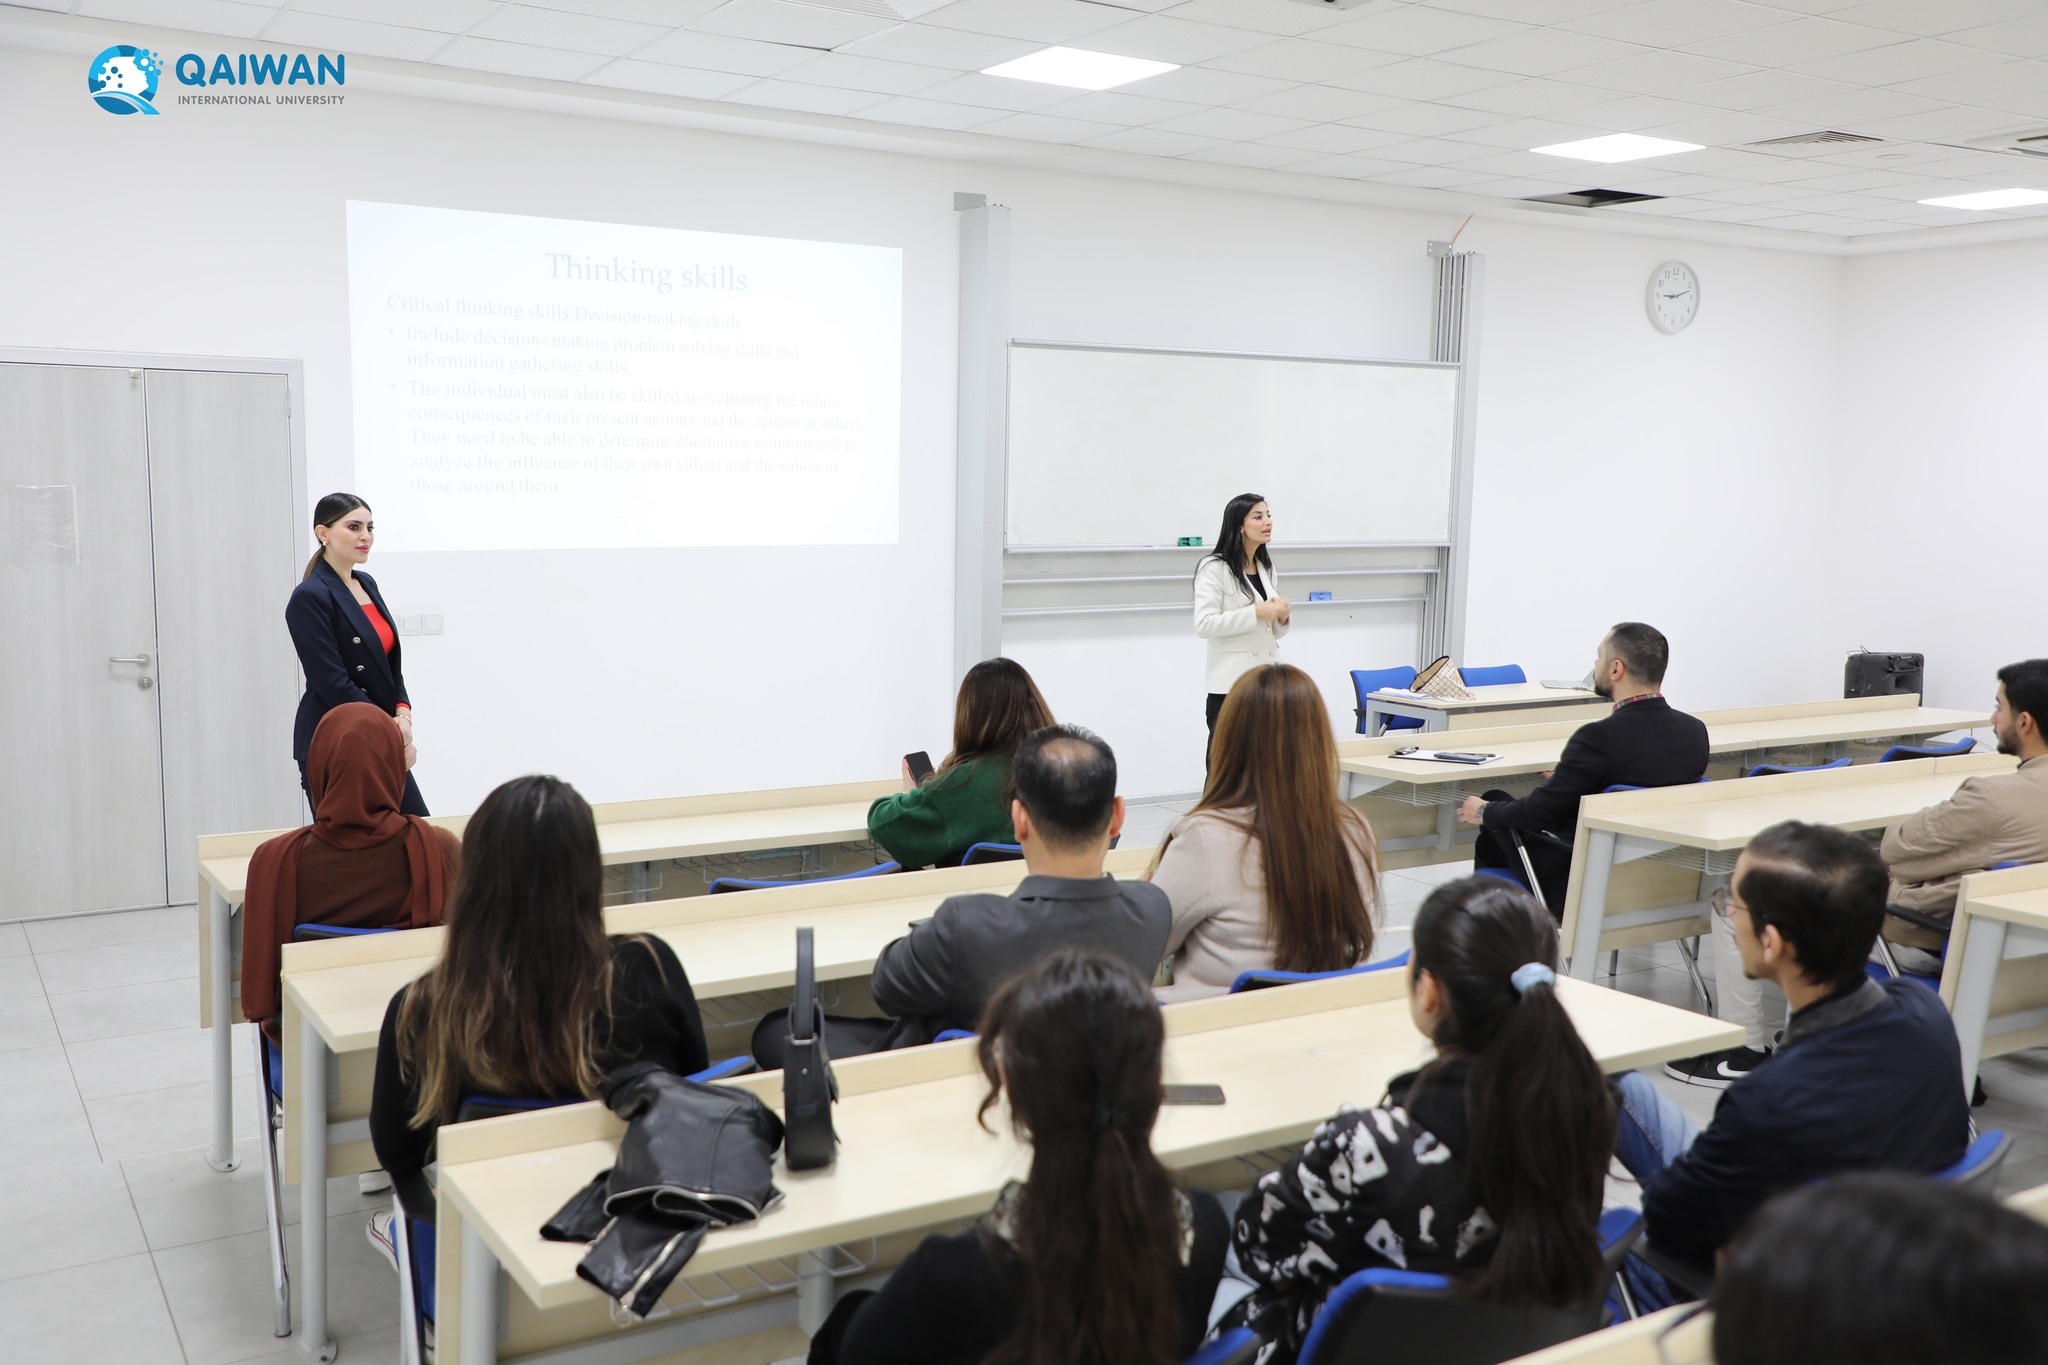 A workshop was held by Faculty of Management and Social Sciences on Mastering Key Skills for Students and its importance for students transitioning into adulthood